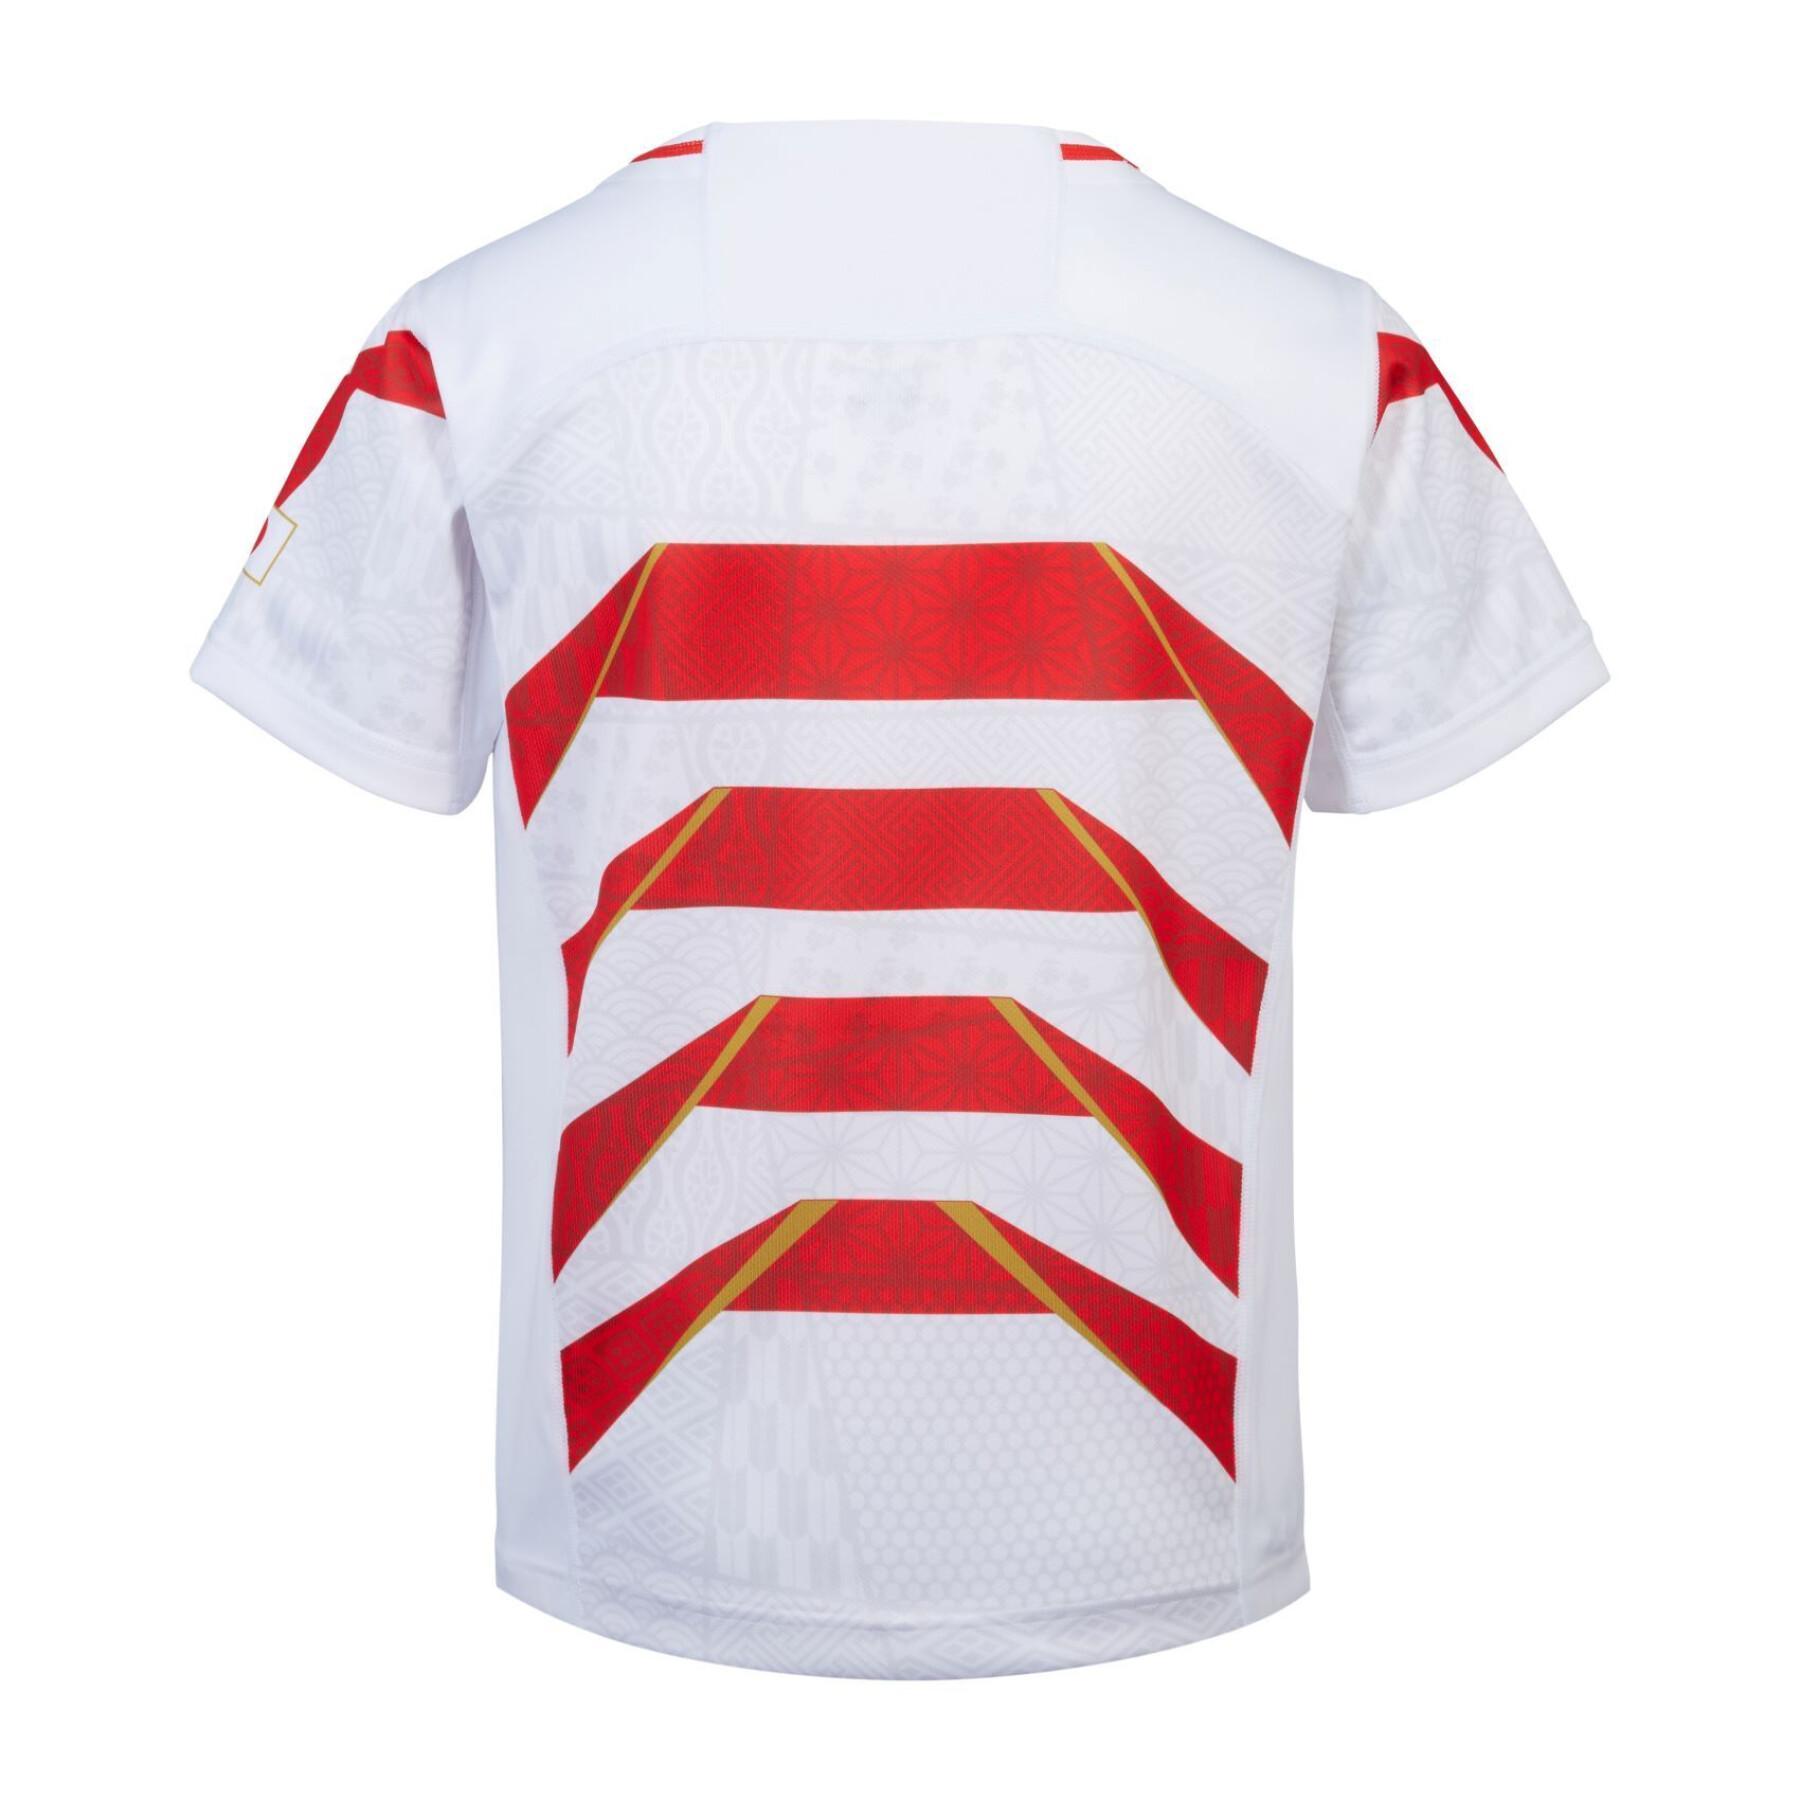 japan Home jersey child rugby world cup 2023